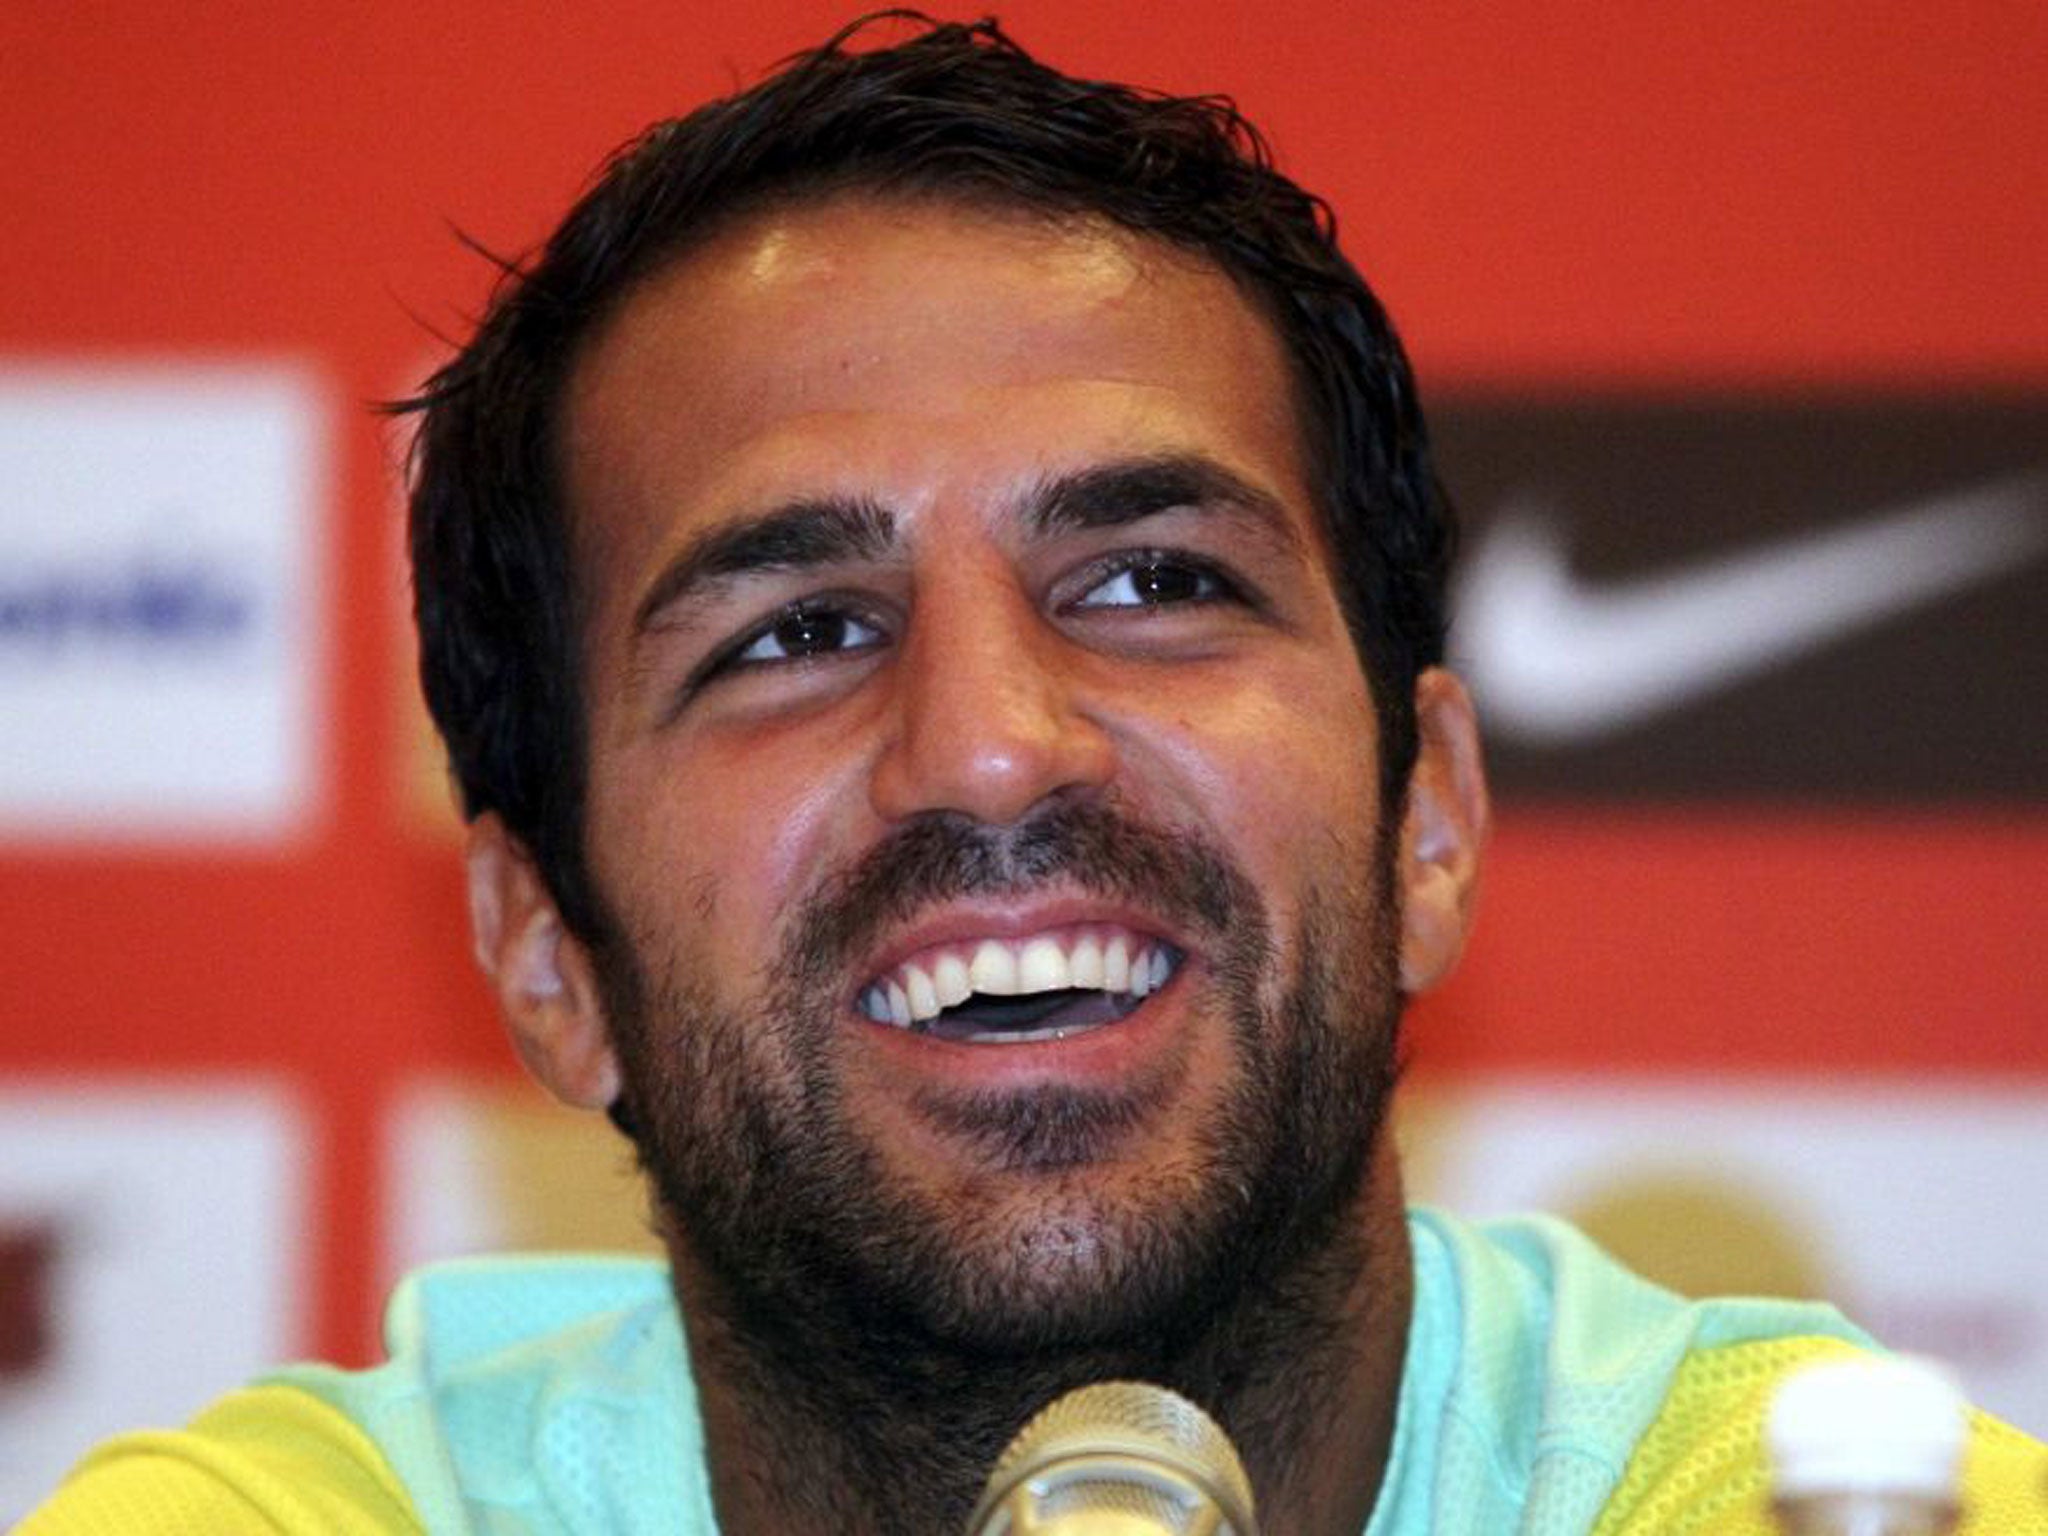 Fabregas said last week it 'never went through my head not to continue here'